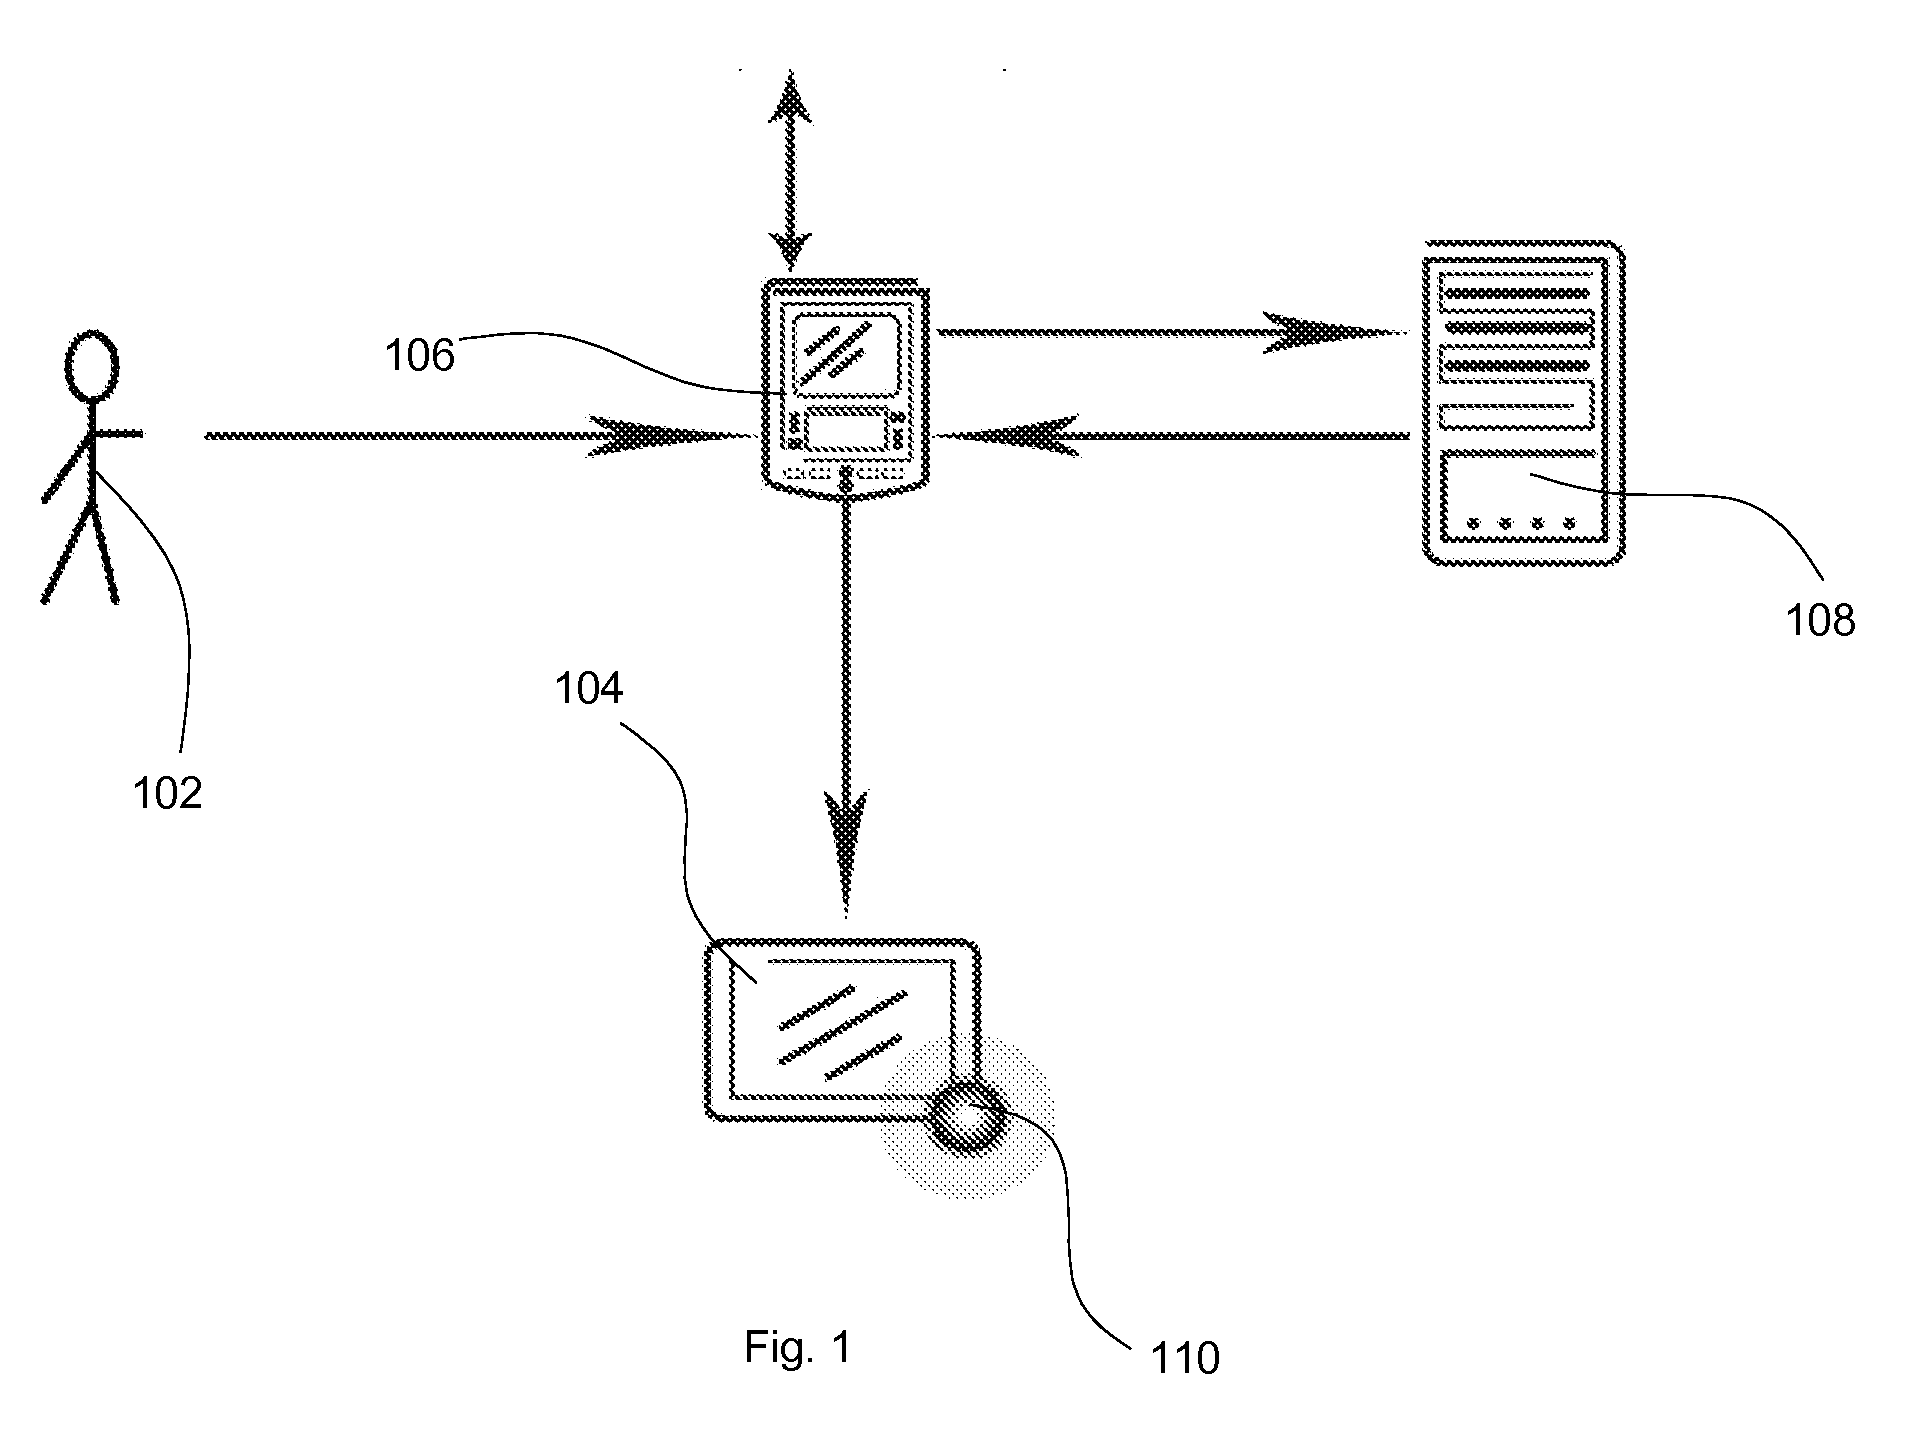 Location-aware payment system